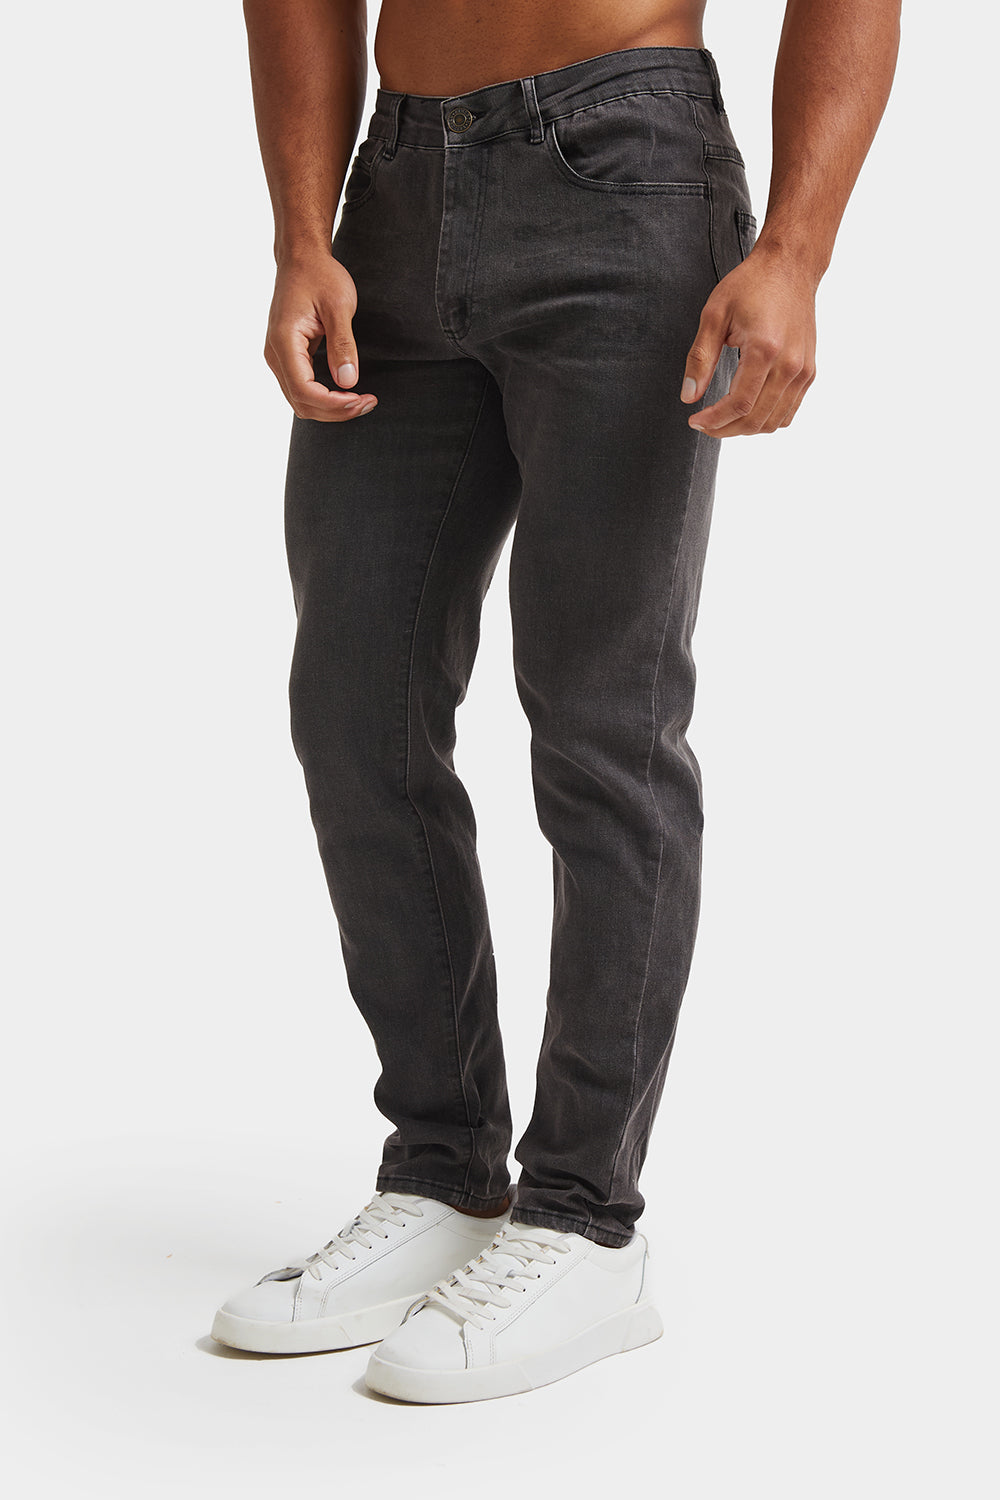 Athletic Fit Grey - Dark ATHLETE TAILORED Jeans - in USA